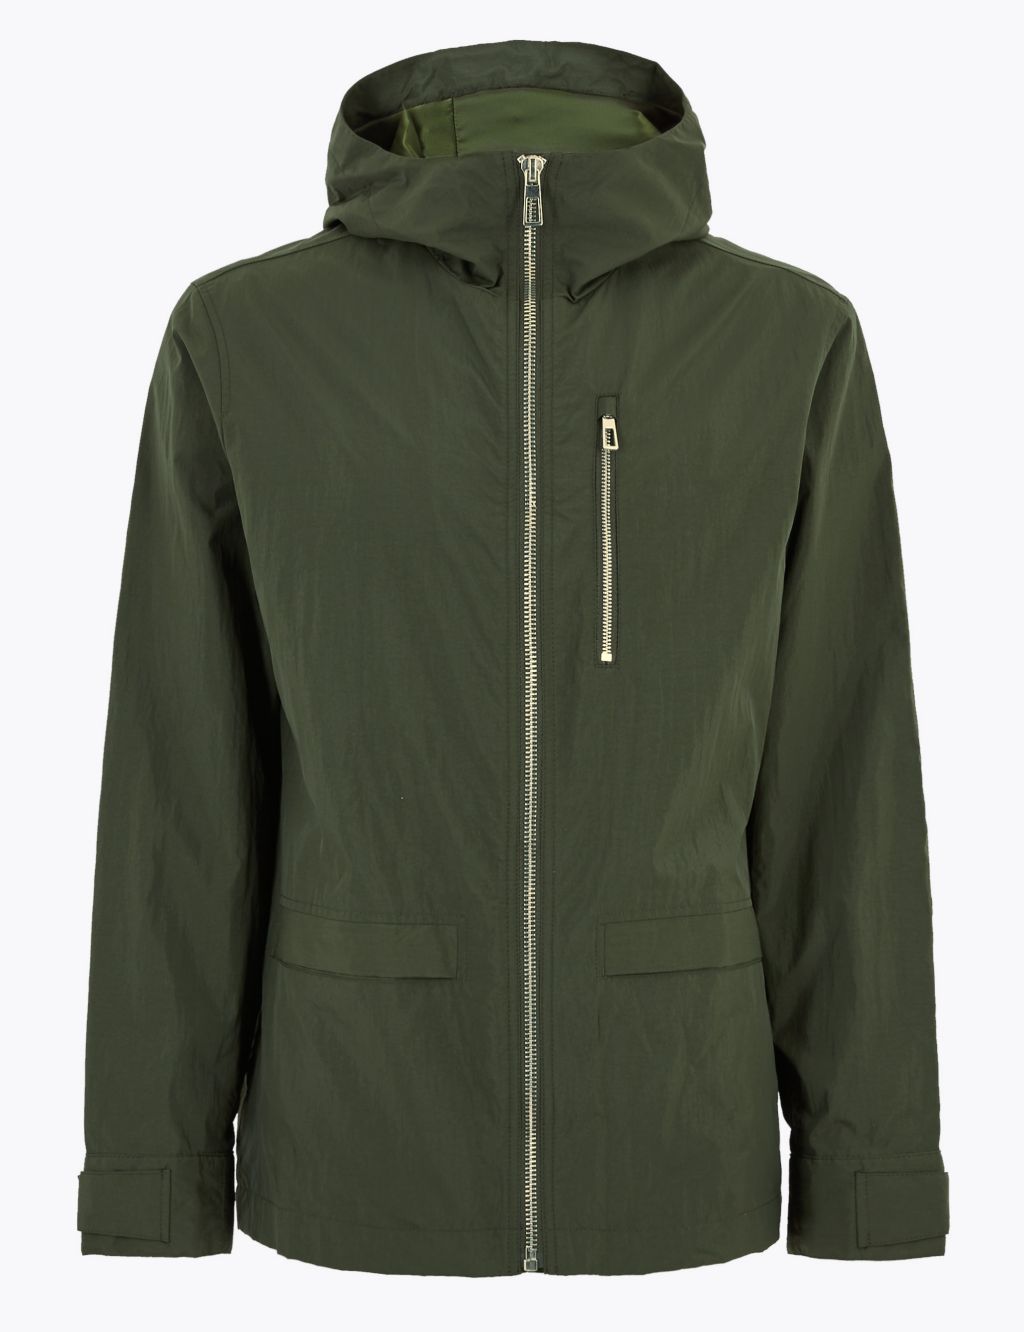 Hooded Parka with Stormwear™ | M&S Collection | M&S